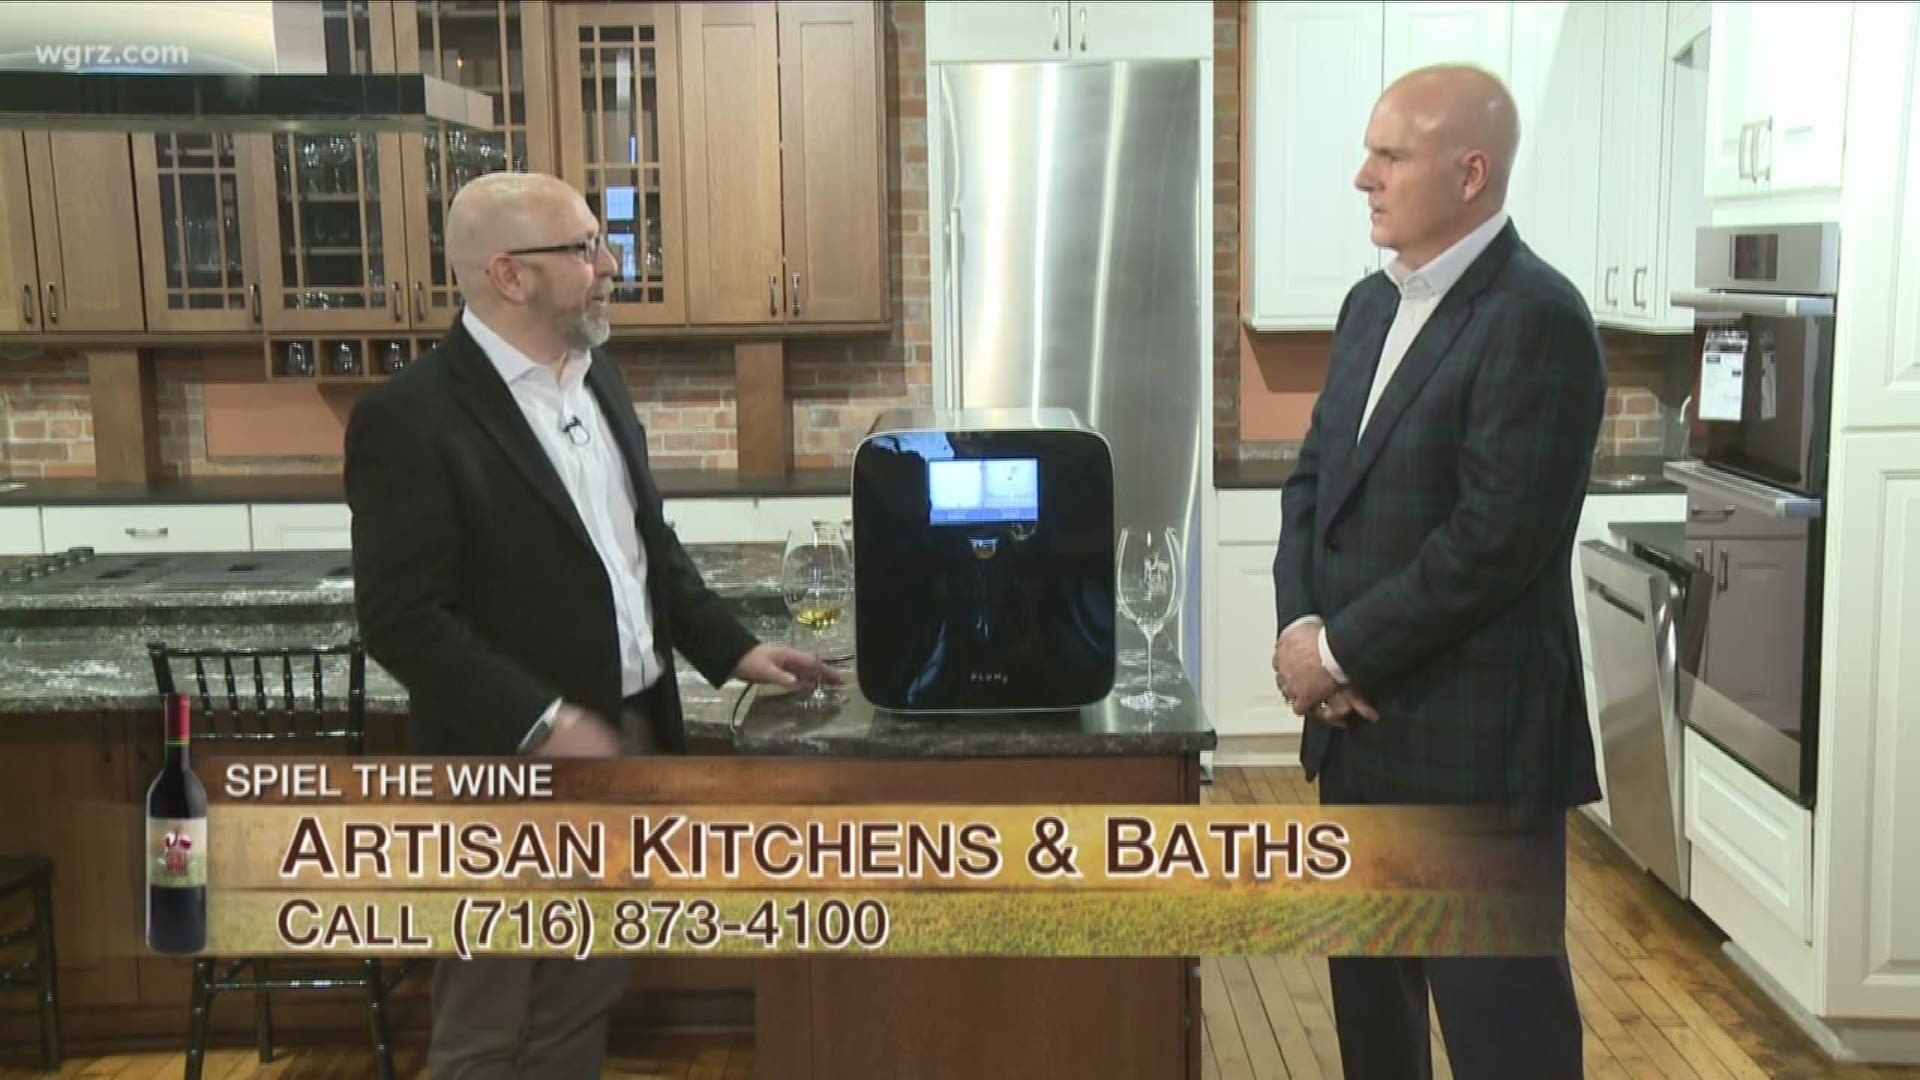 Spiel The Wine - February 8 - Segment 1 (THIS VIDEO IS SPONSORED BY ARTISAN KITCHENS & BATHS)